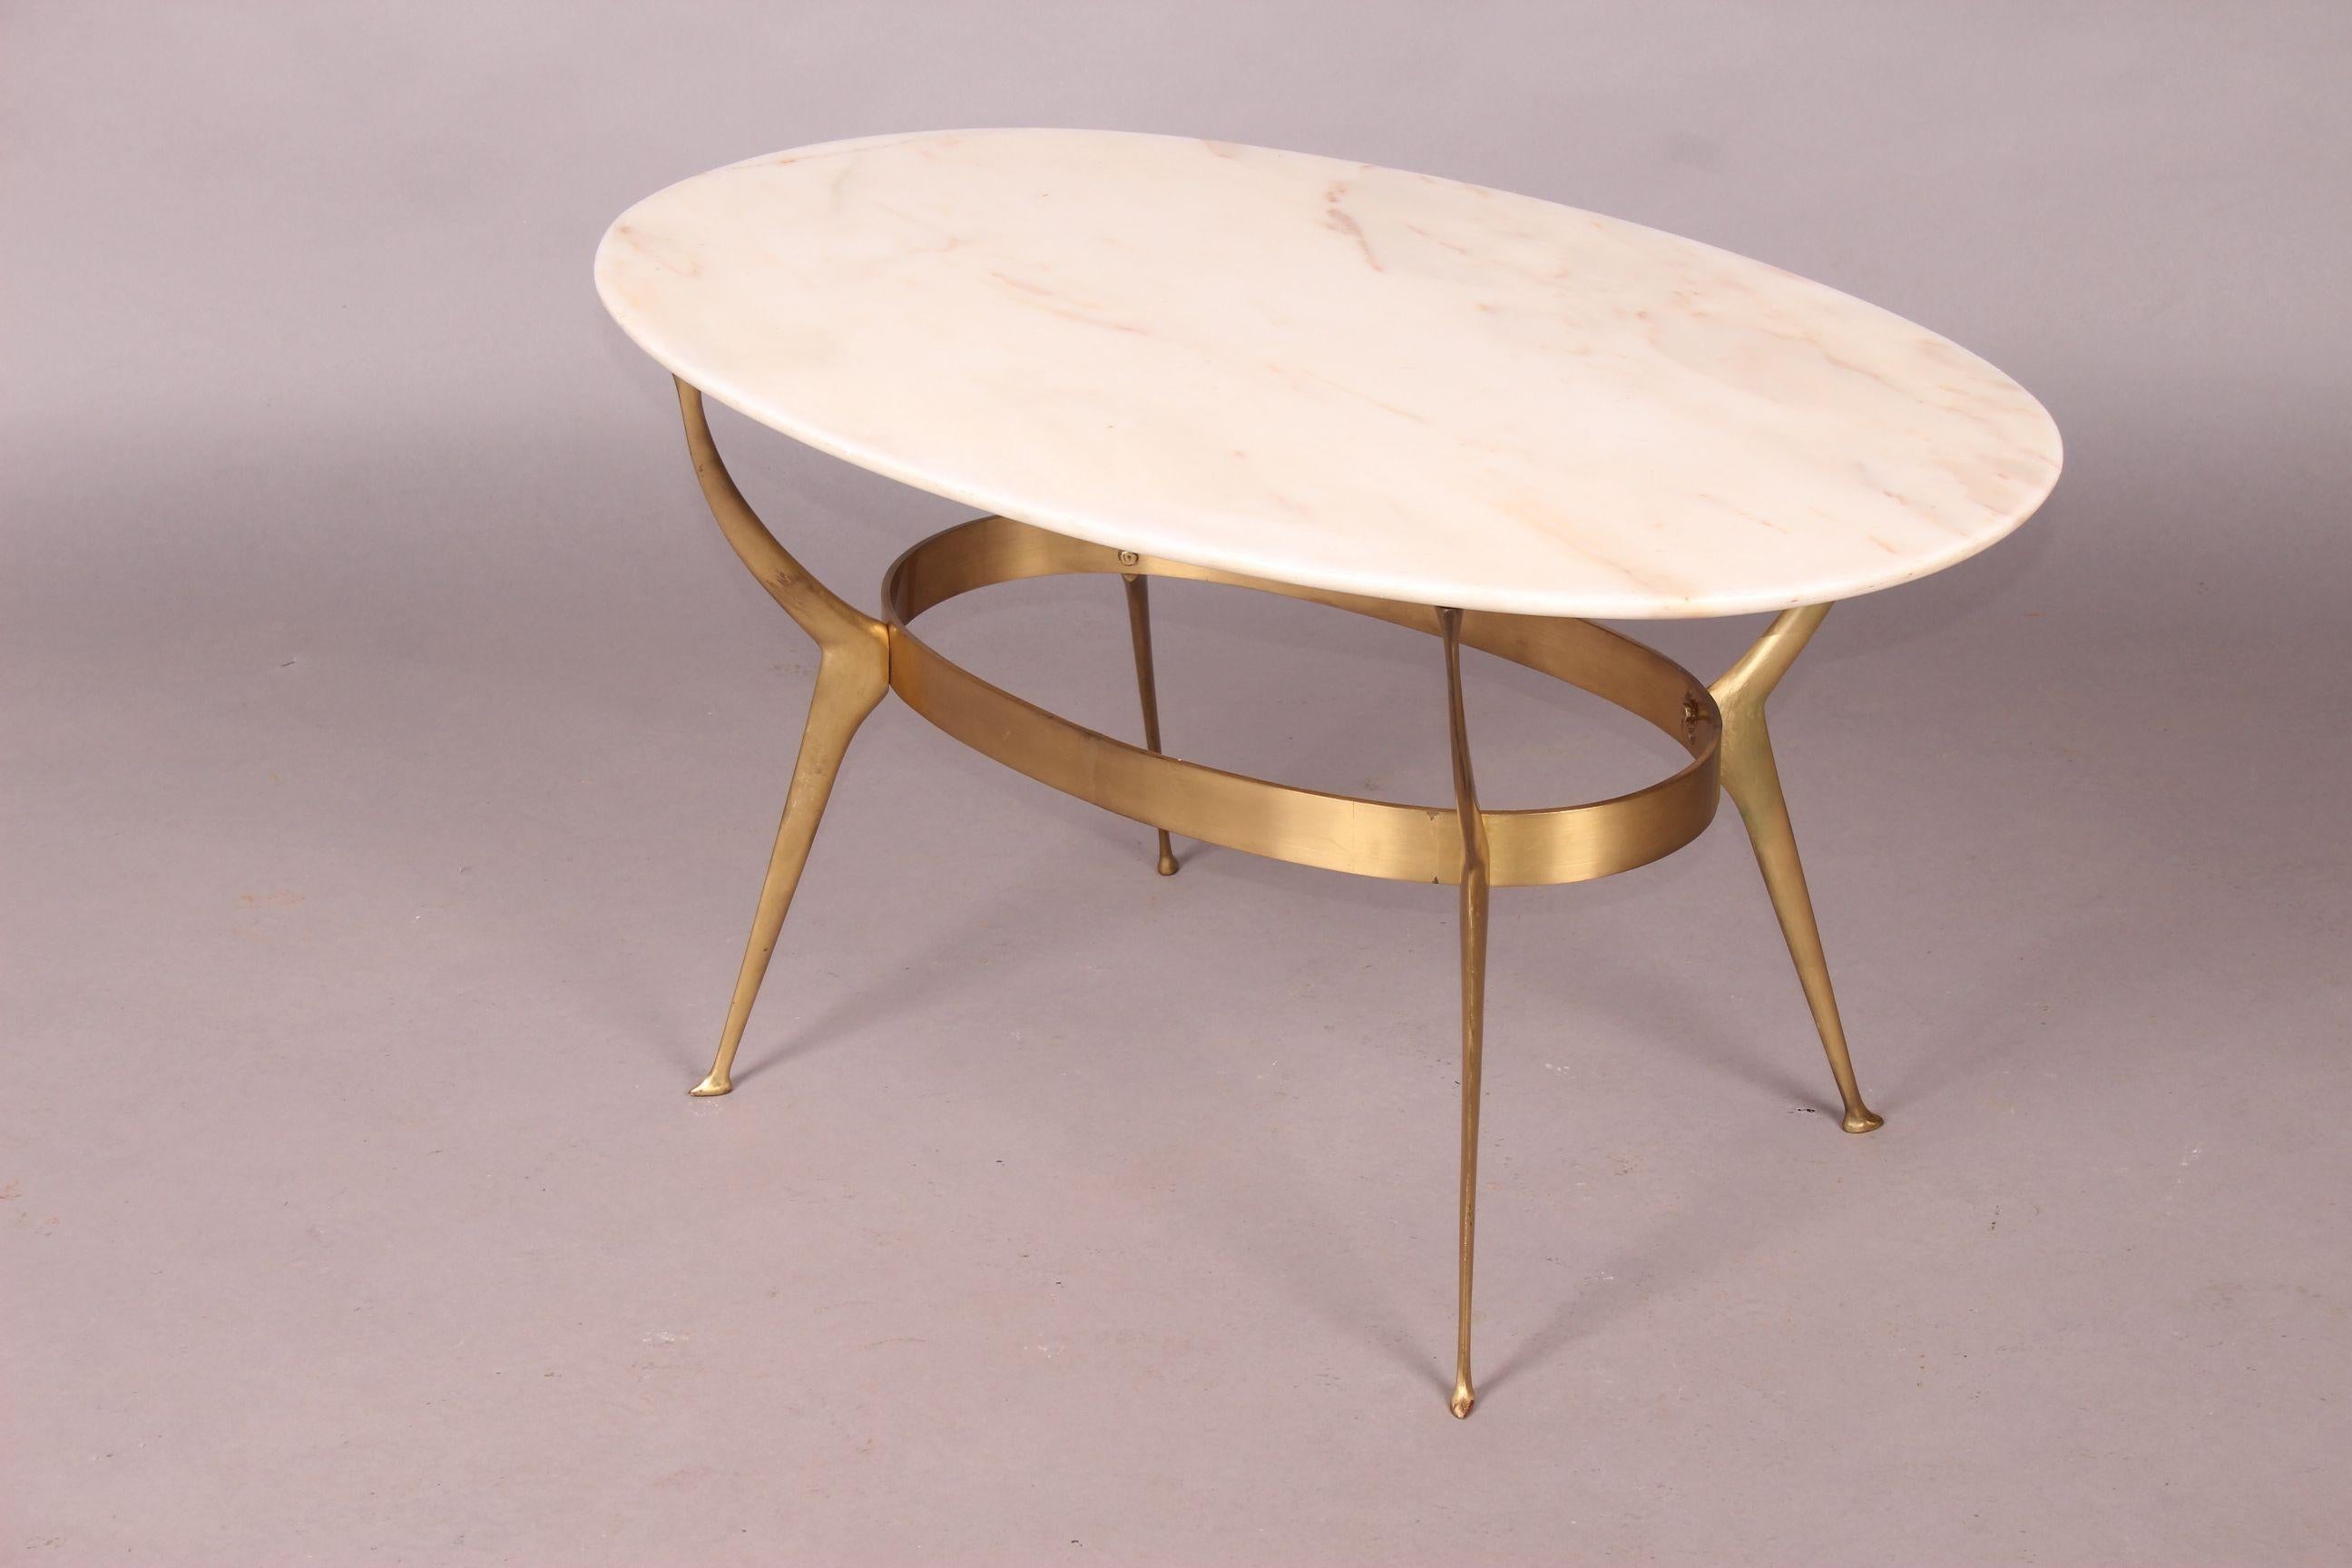  Cesare Lacca Brass and marble side table, a small damage on the marble top (photo).